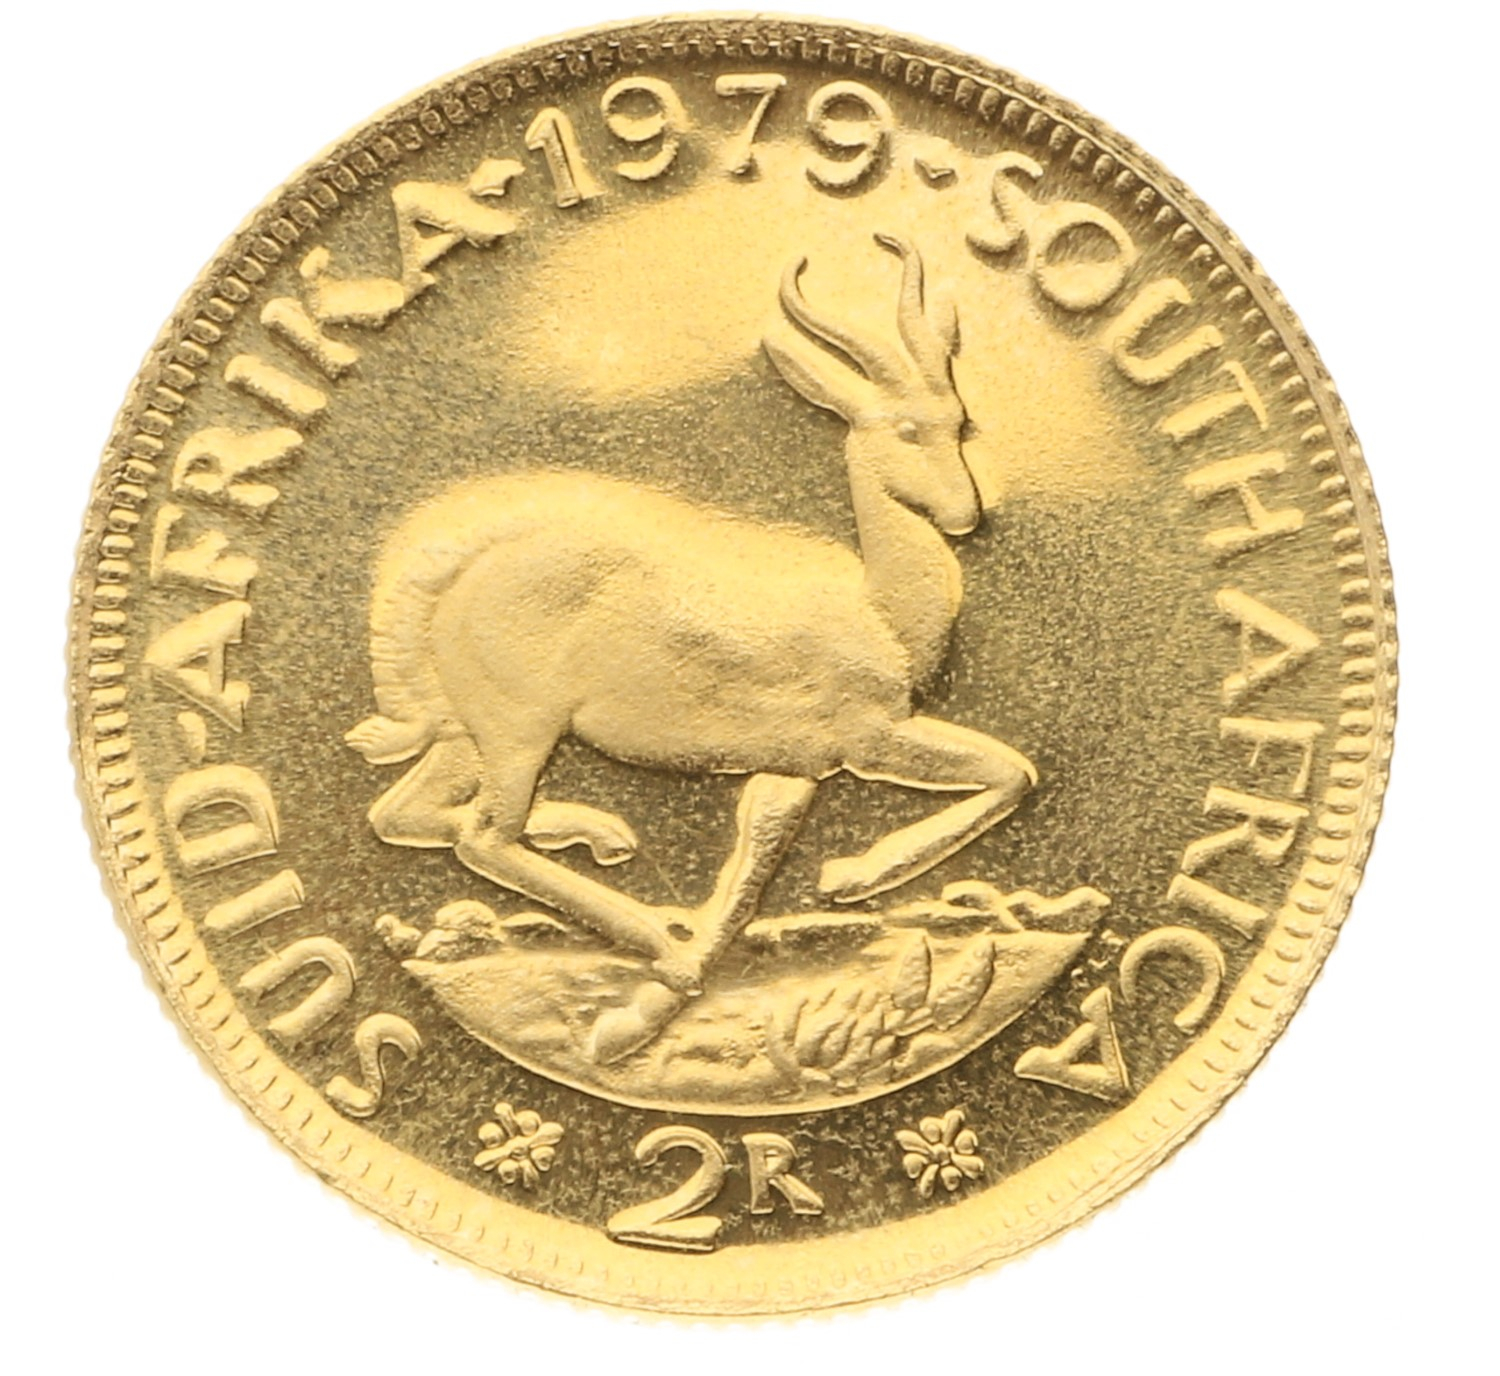 2 Rand - South Africa - 1979